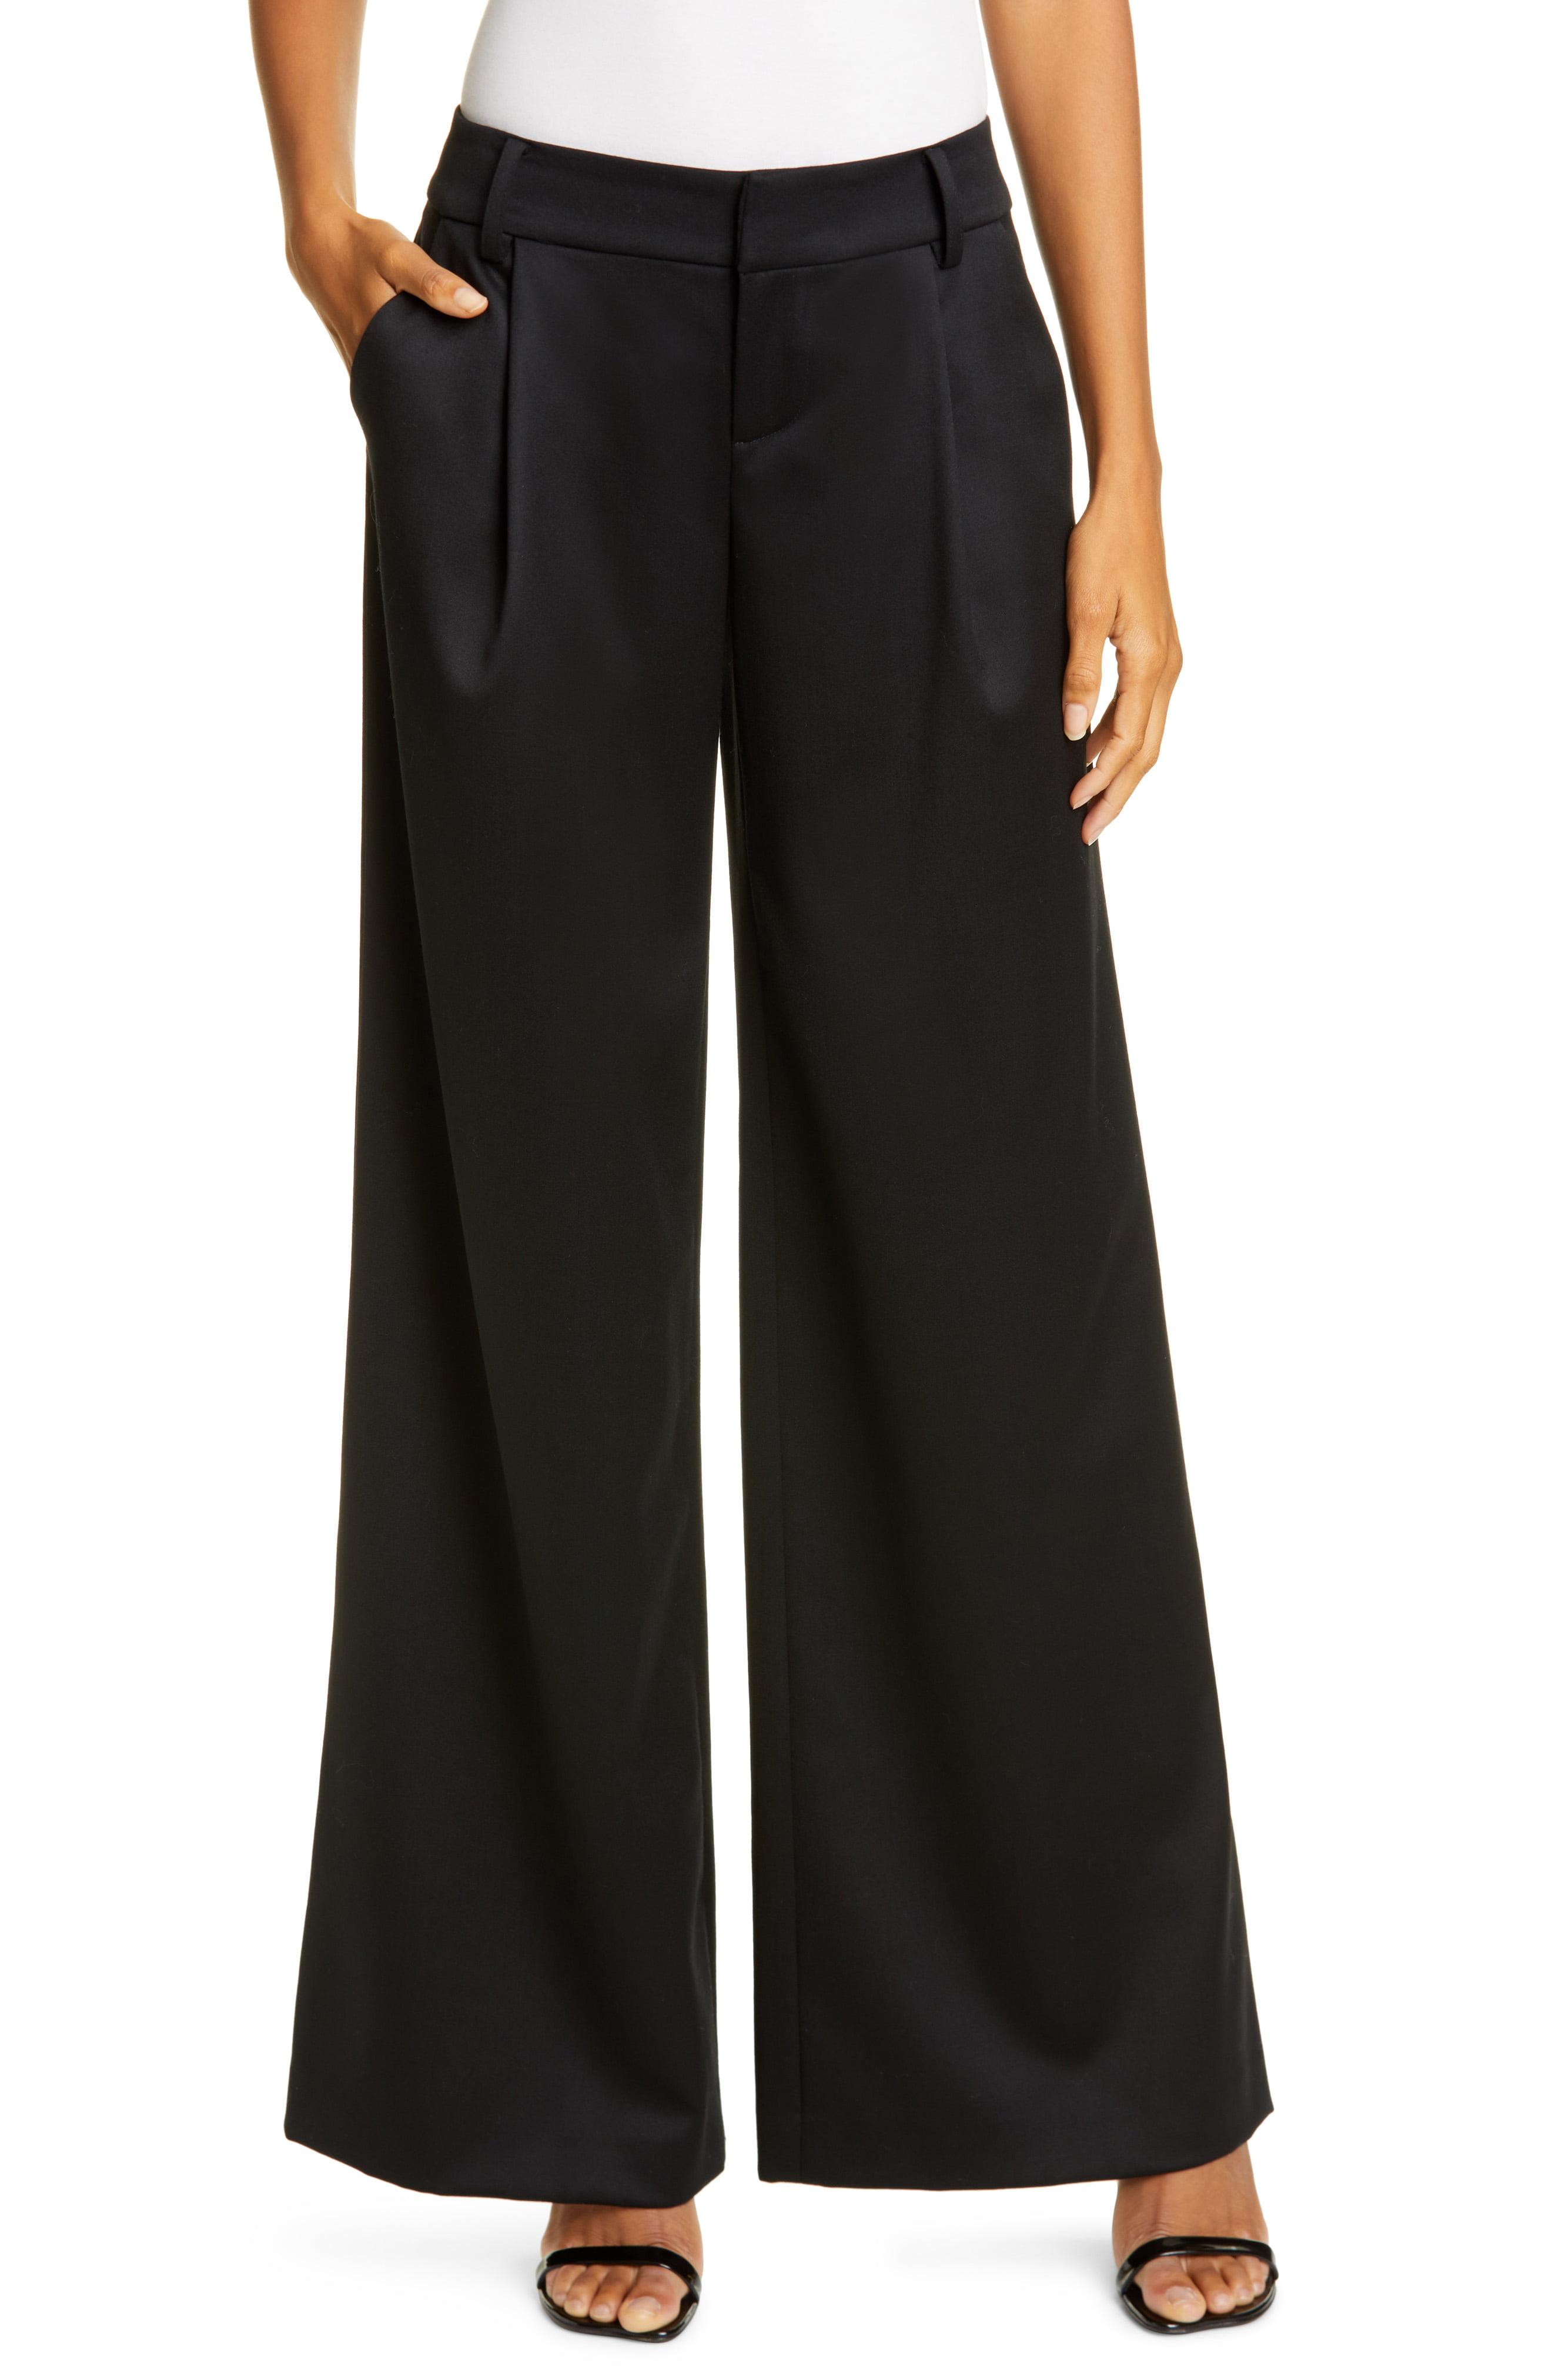 Alice + Olivia Eric Front Pleat Wide Leg Pants in Black   Lyst